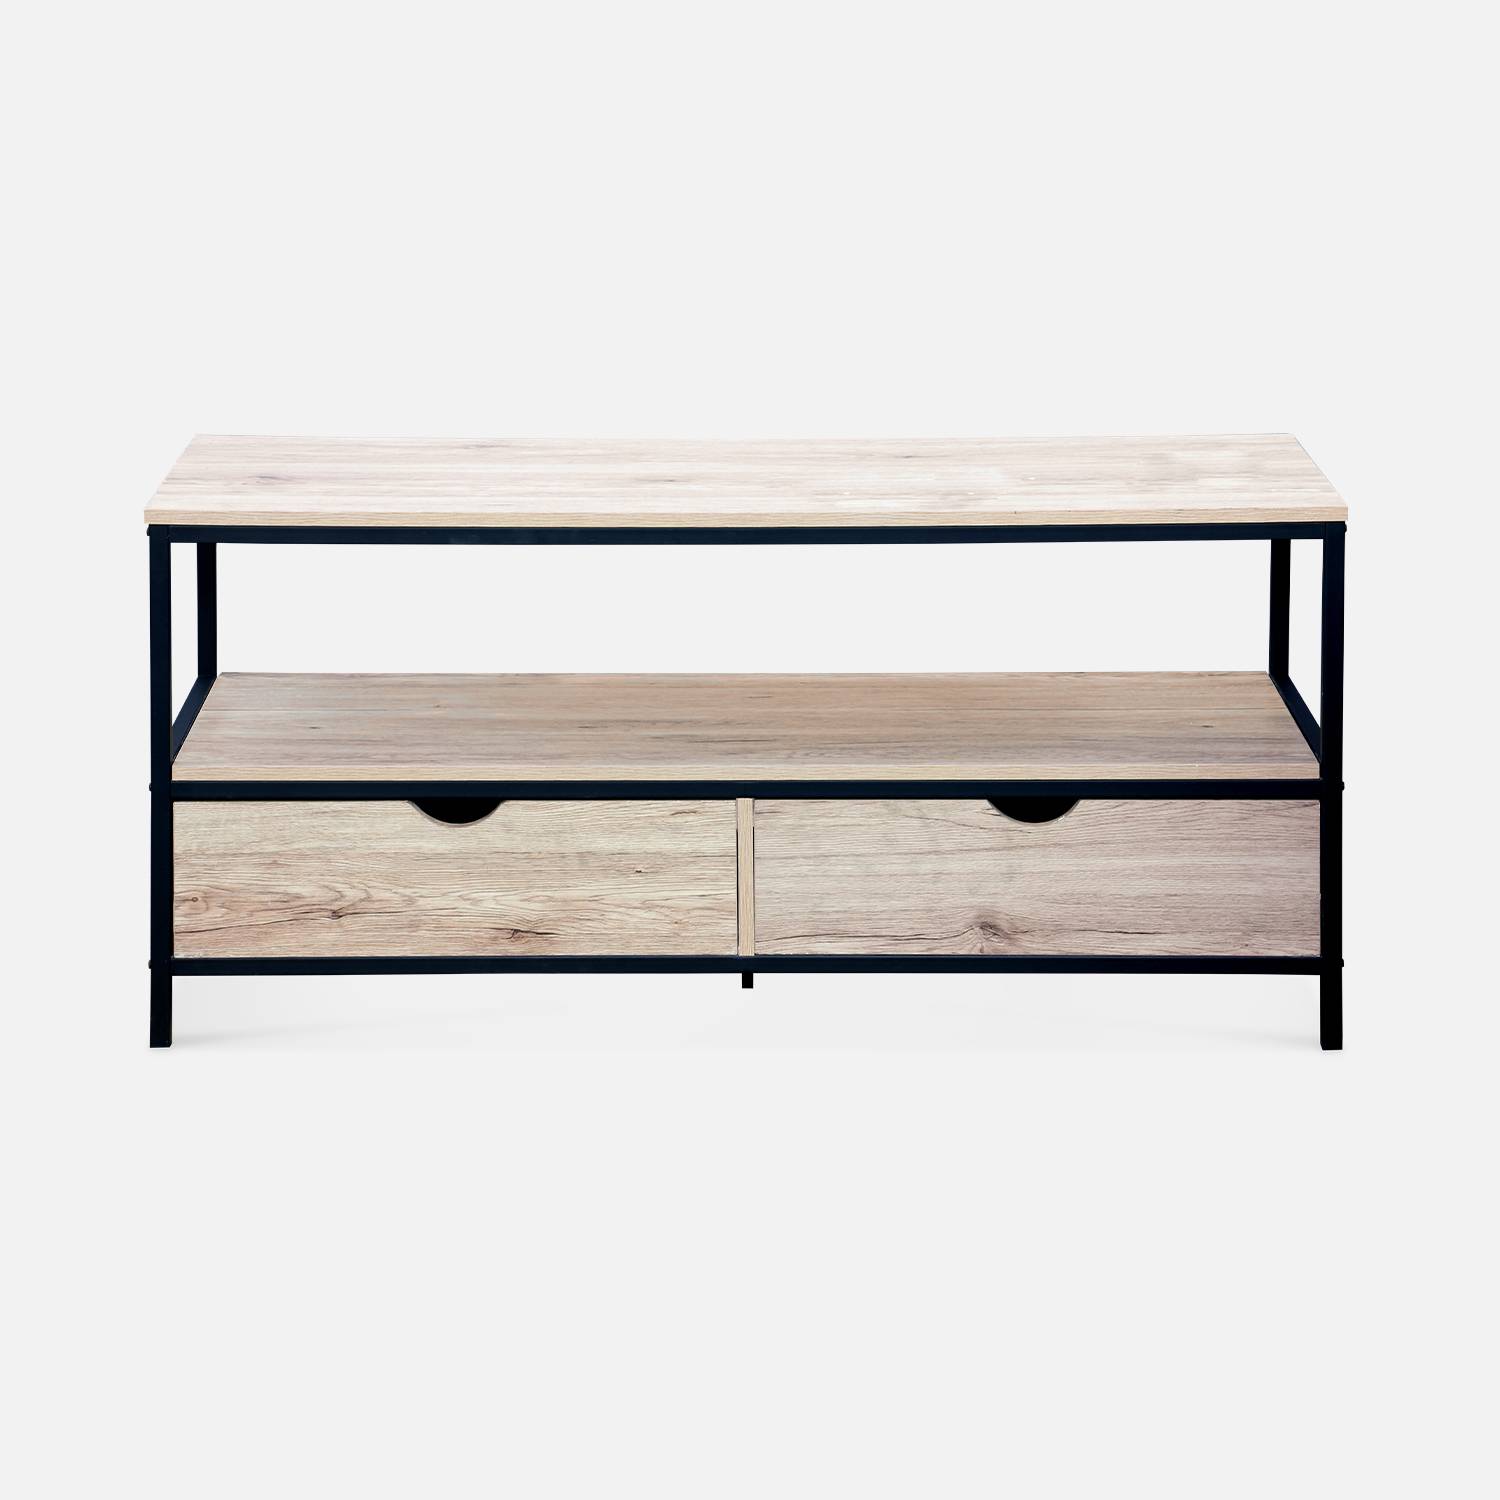 Industrial metal and wood effect TV stand with 2 drawers, 20x39x57cm - Loft - Black Photo6